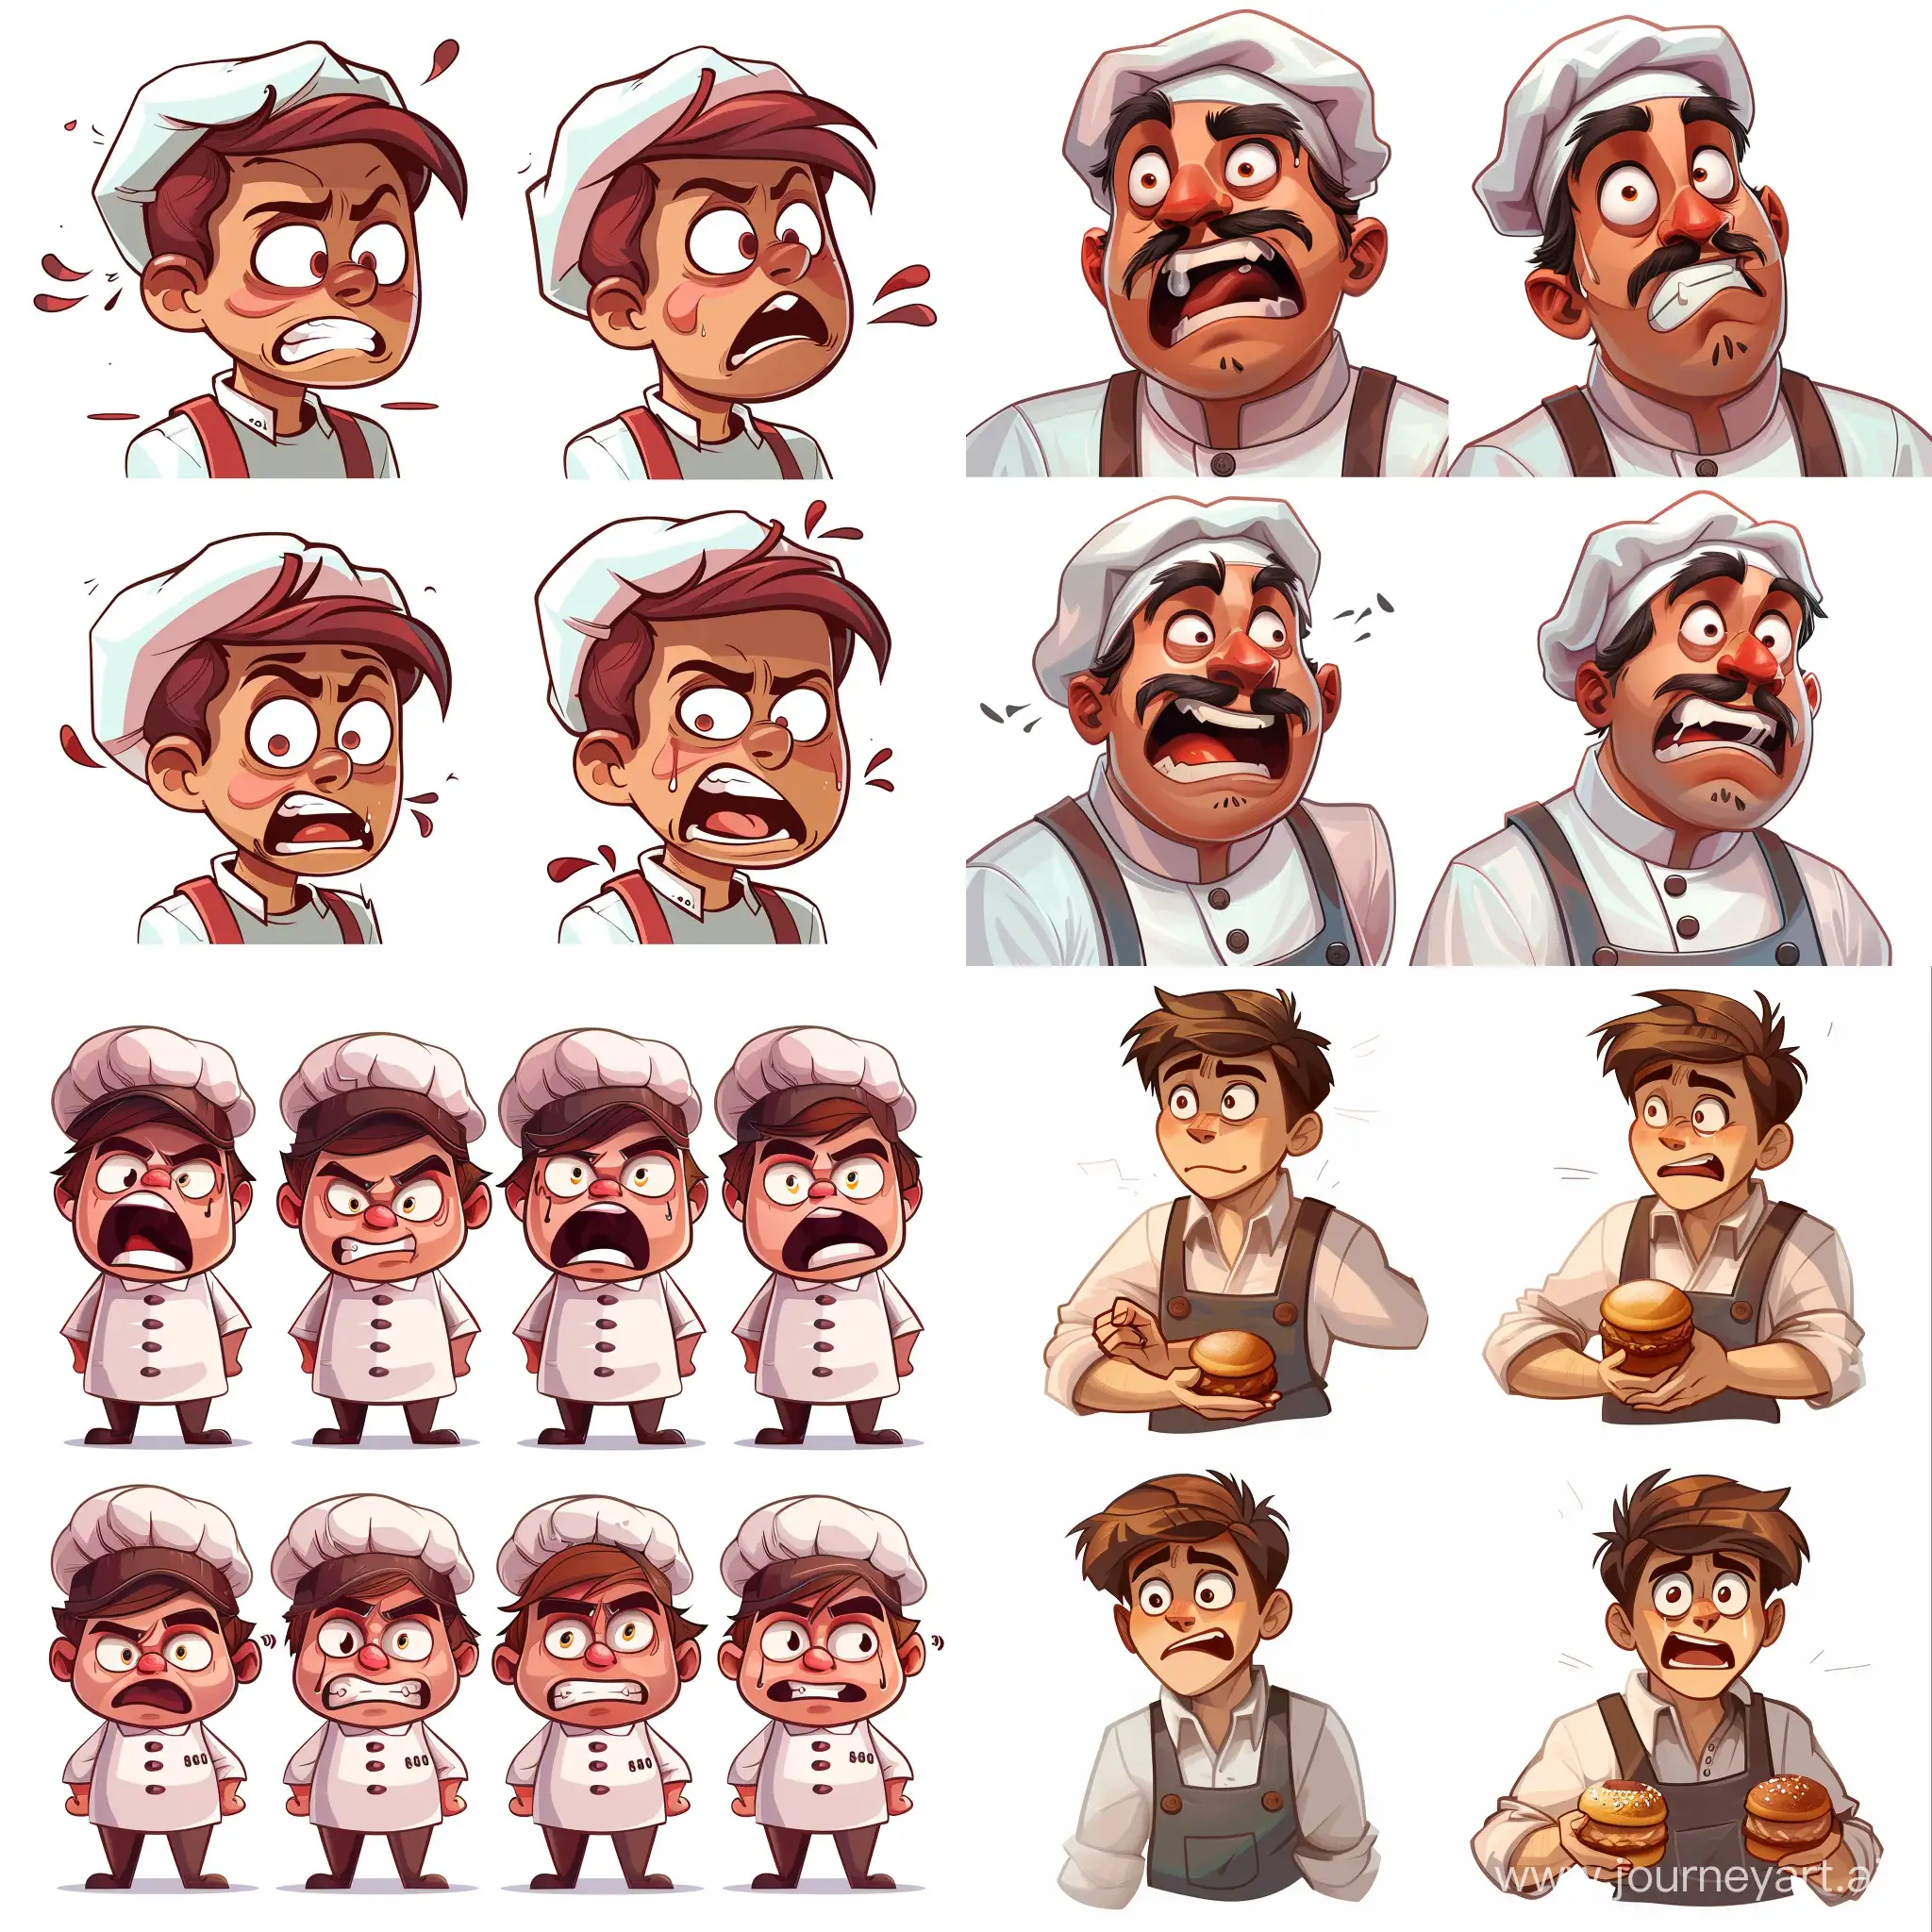 Comic cartoon of 4 time the same baker characters with different emotions ranging from happy to grumpy for a video game, fun. Use only 3c2337,fadcca,f5965f,ed6f4c,fa4637 and their shades, Style of Erik Jones, sparth, highly detailed, hyper-detailed, with a white background.